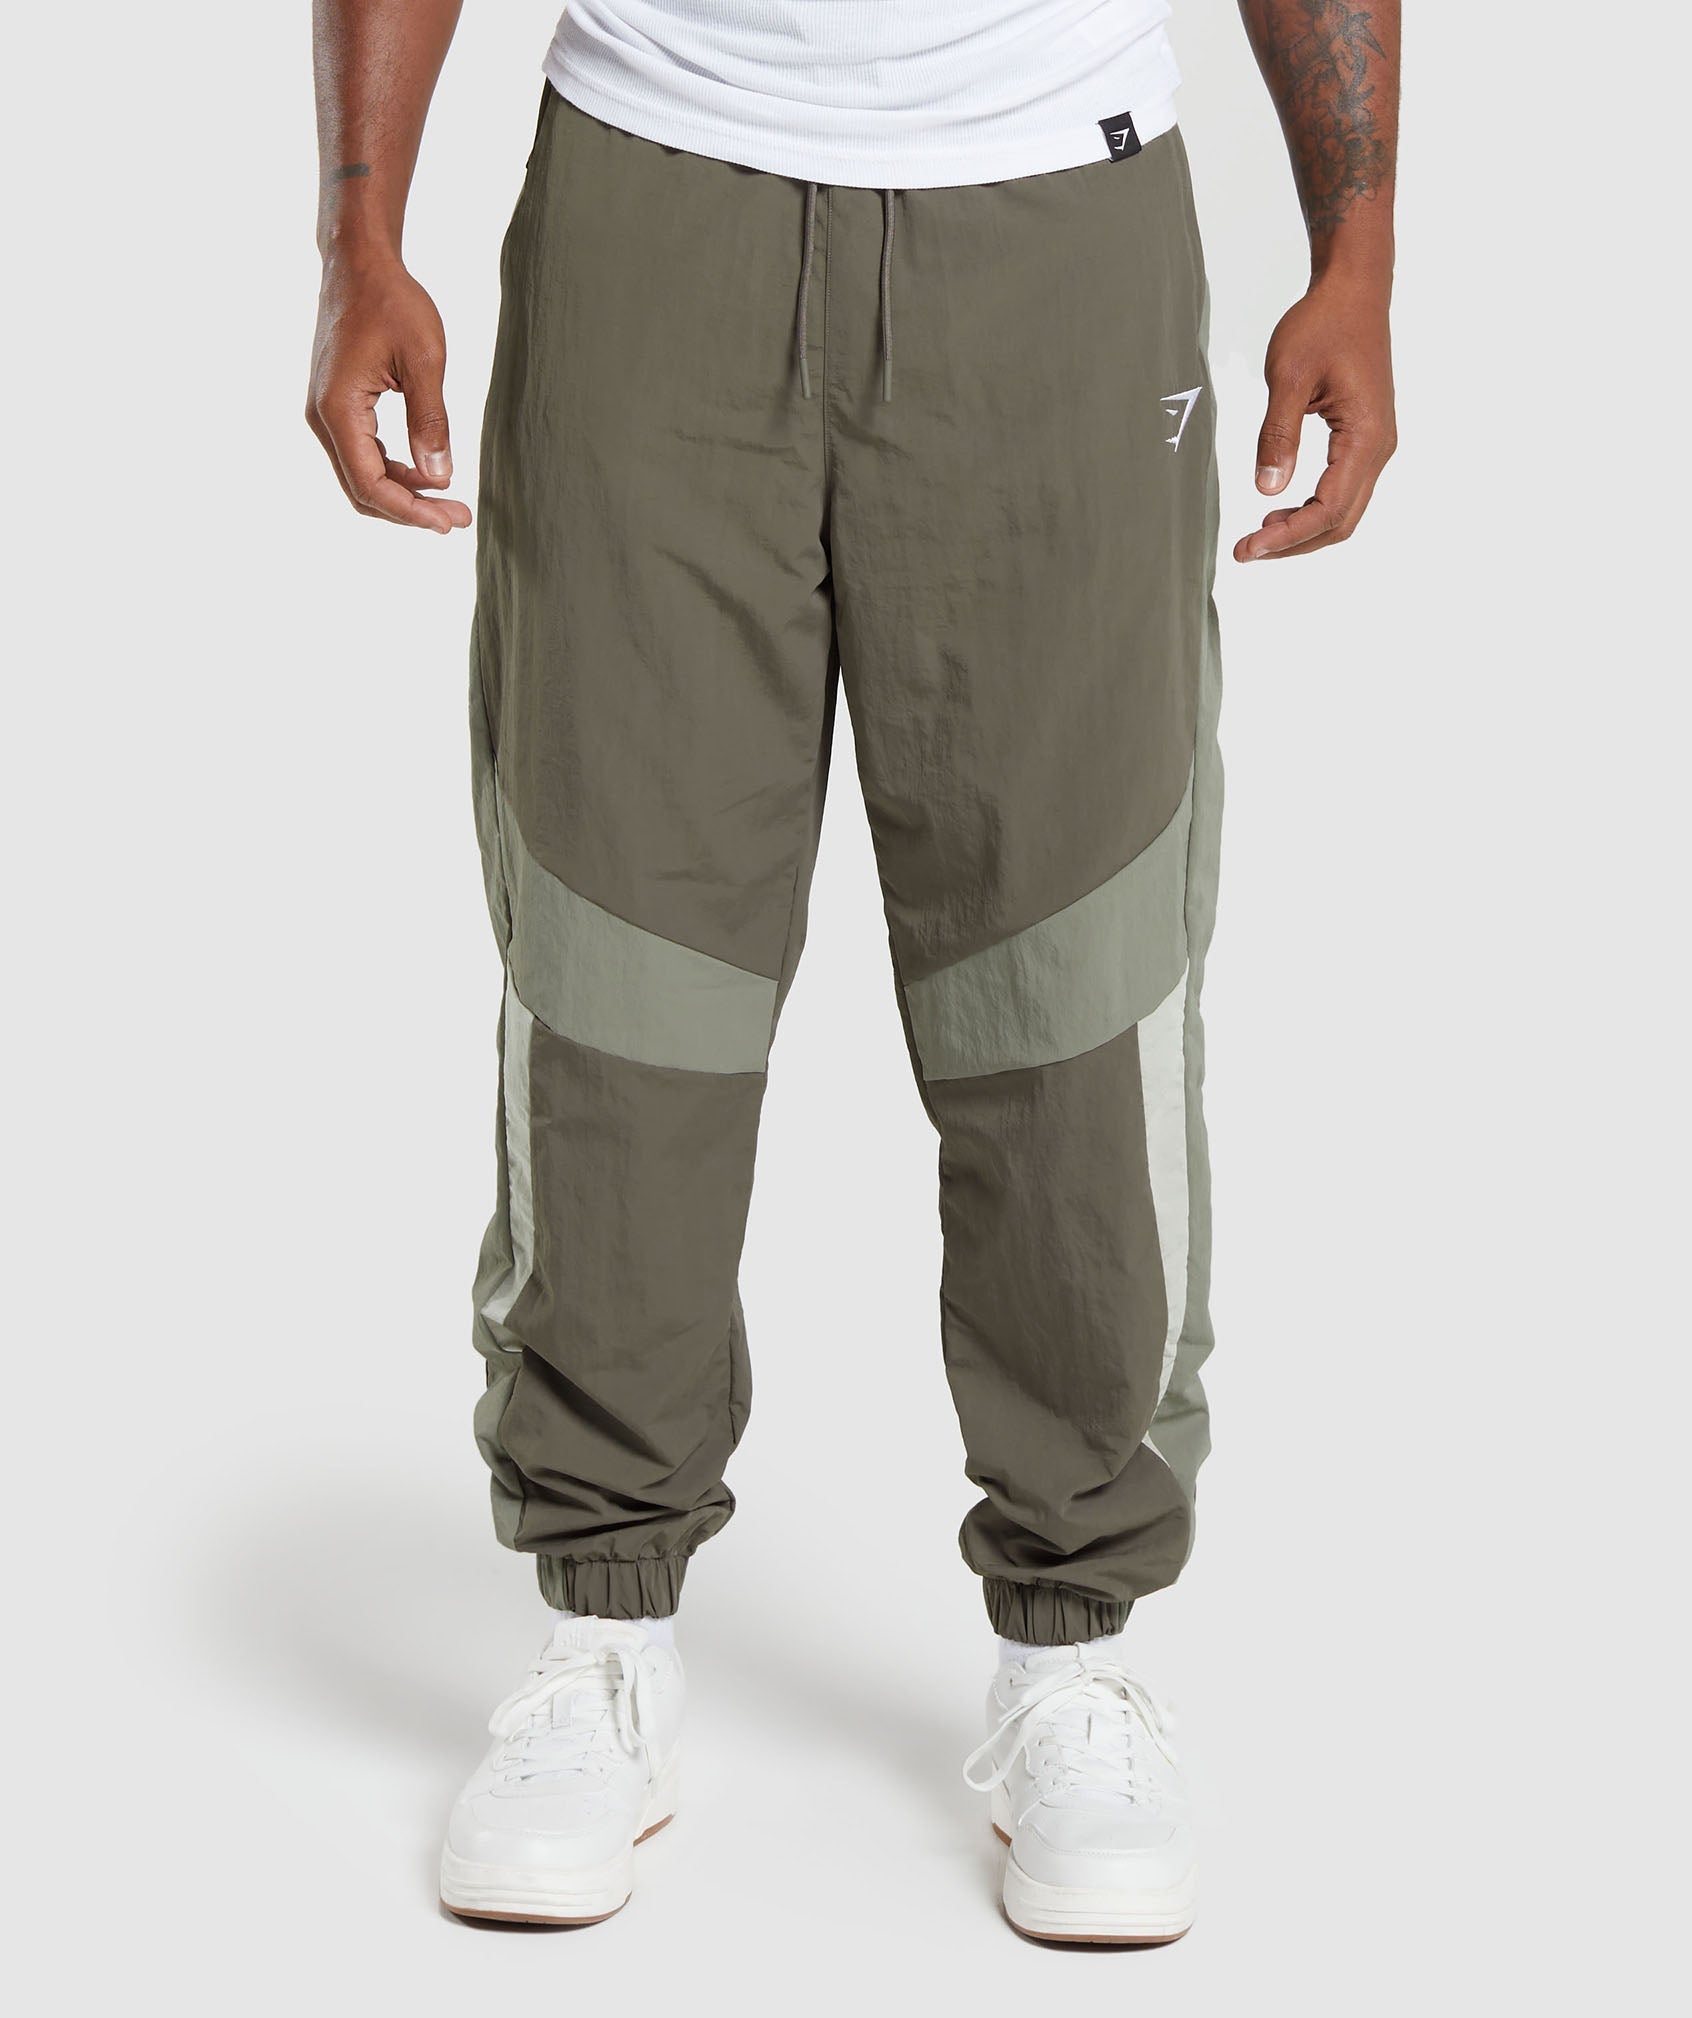 Retro Track Pants in {{variantColor} is out of stock